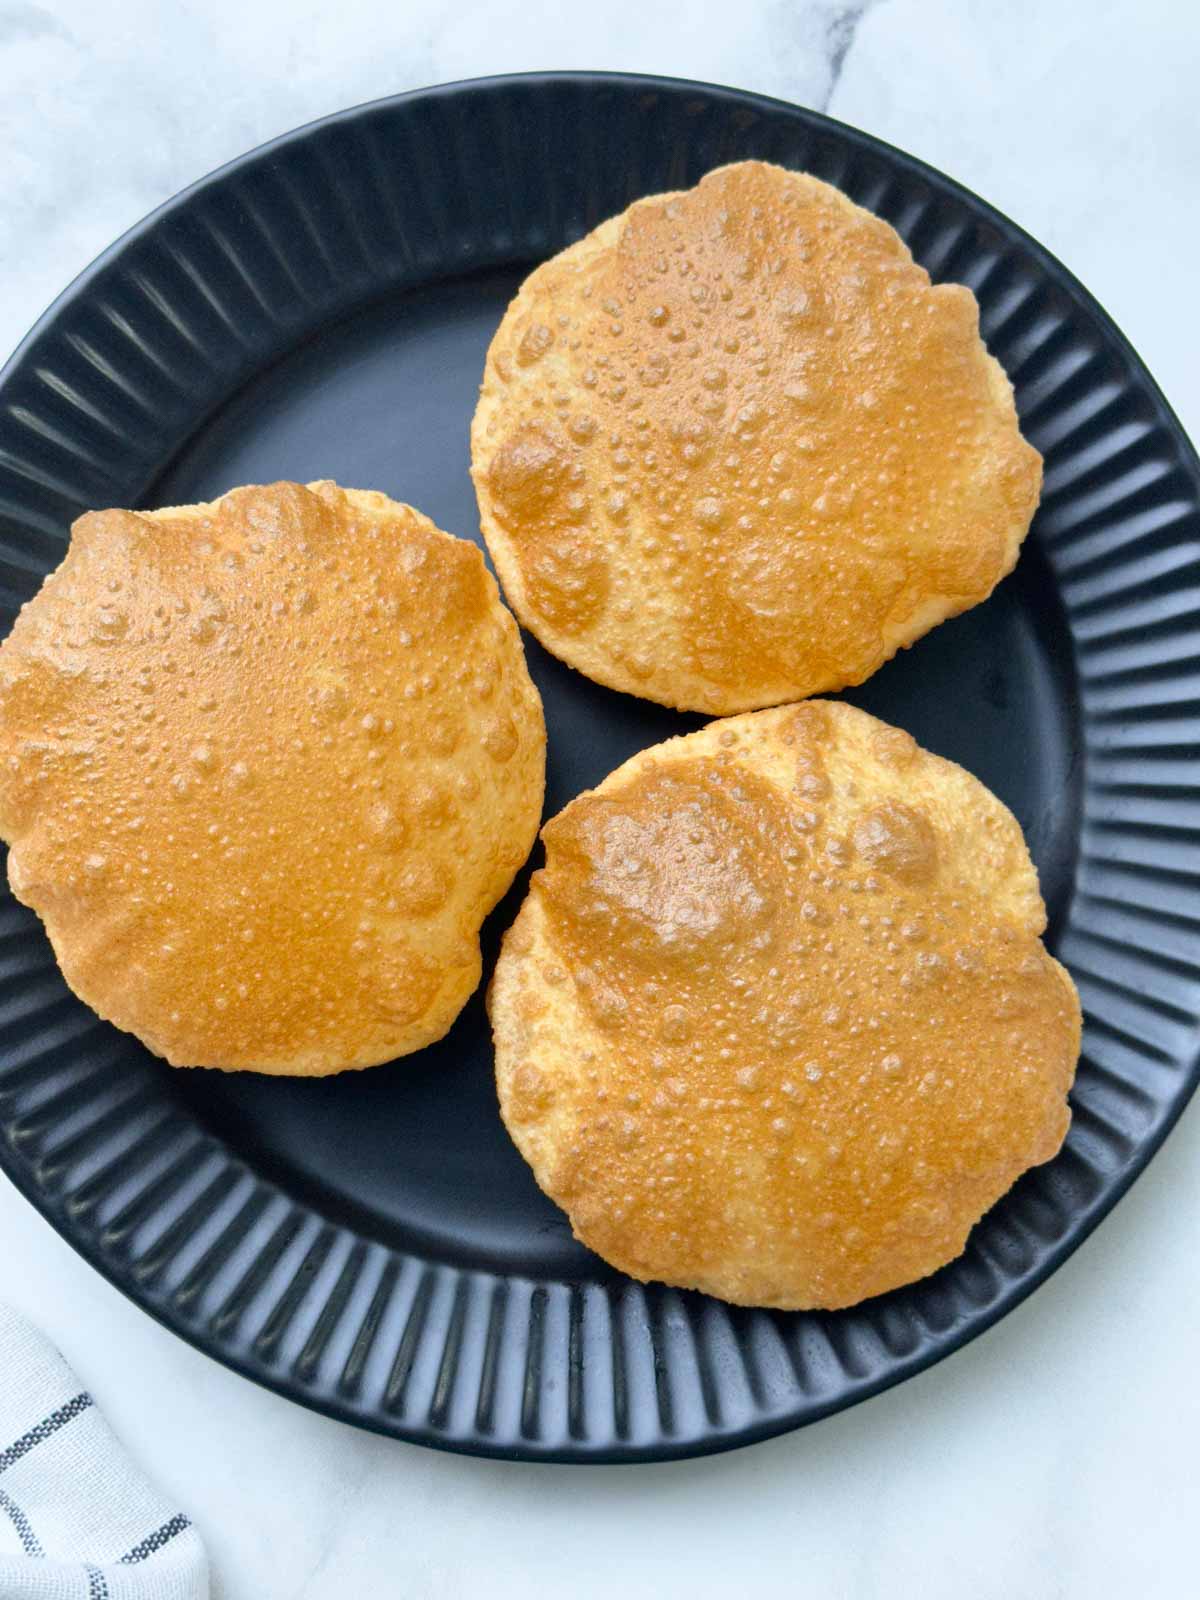 crispy and puffy three puffed indian bread served on a plate